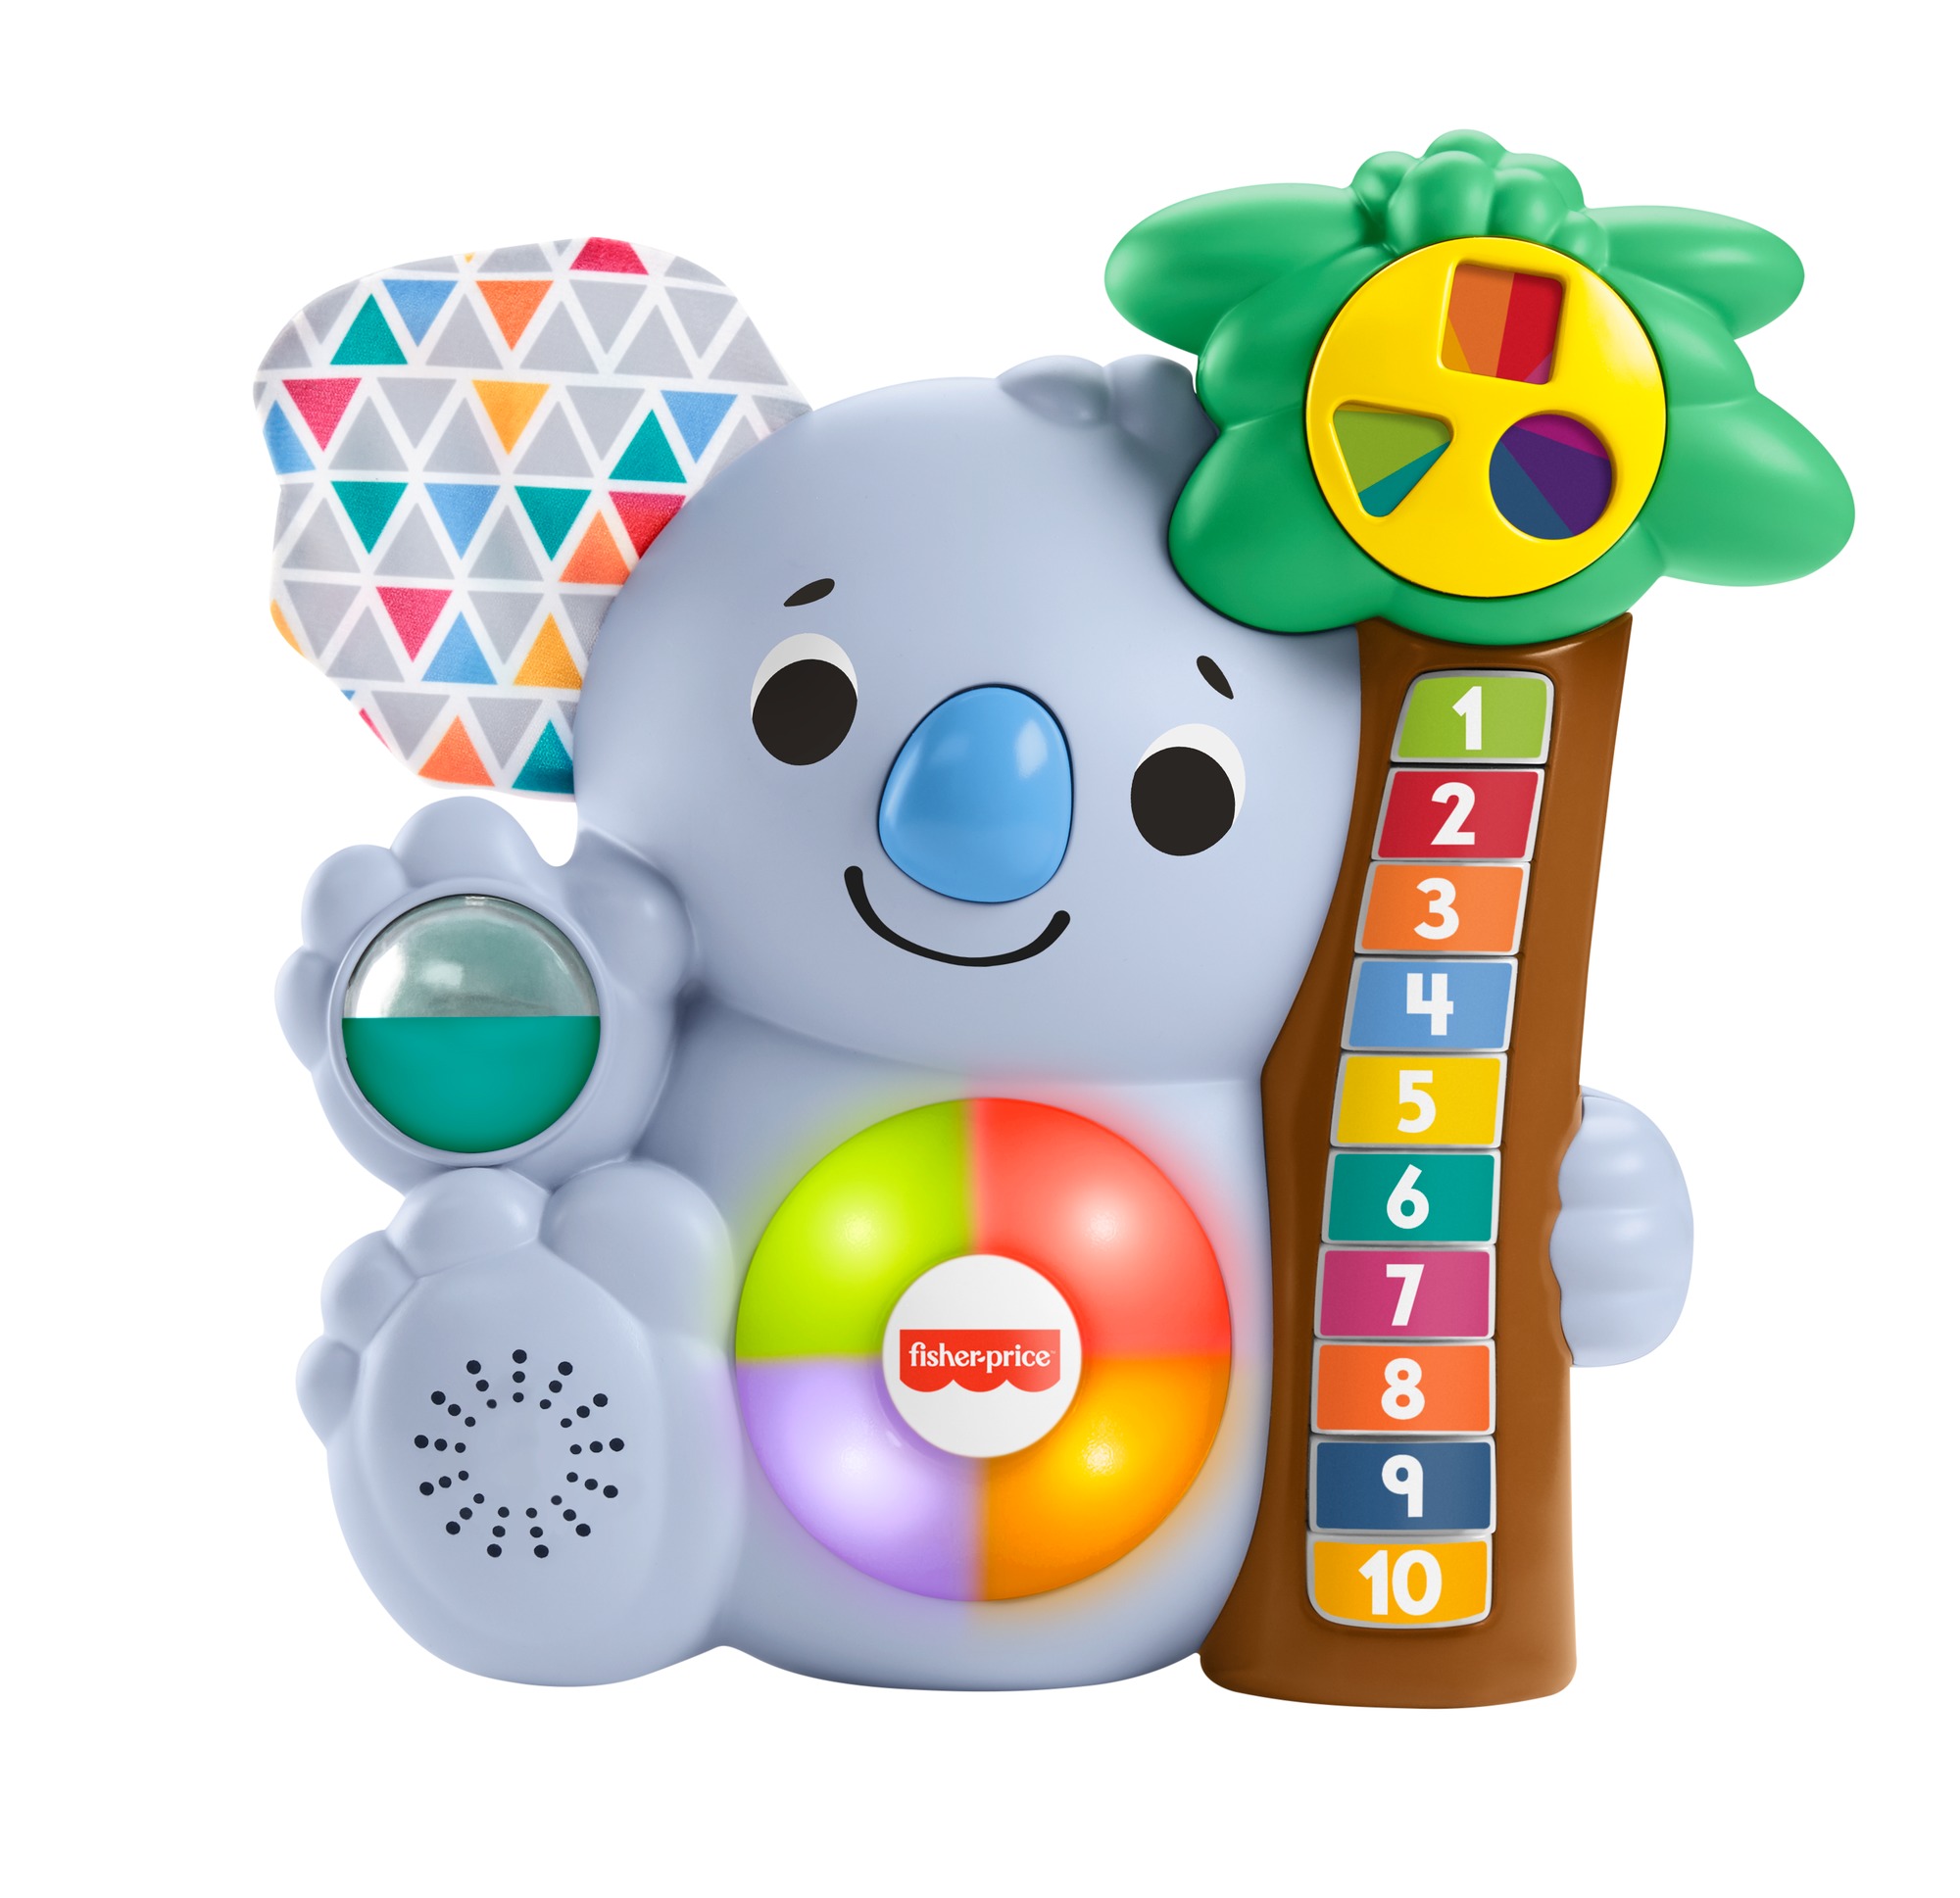 Fisher-Price Linkimals Counting Koala Musical Infant Toy